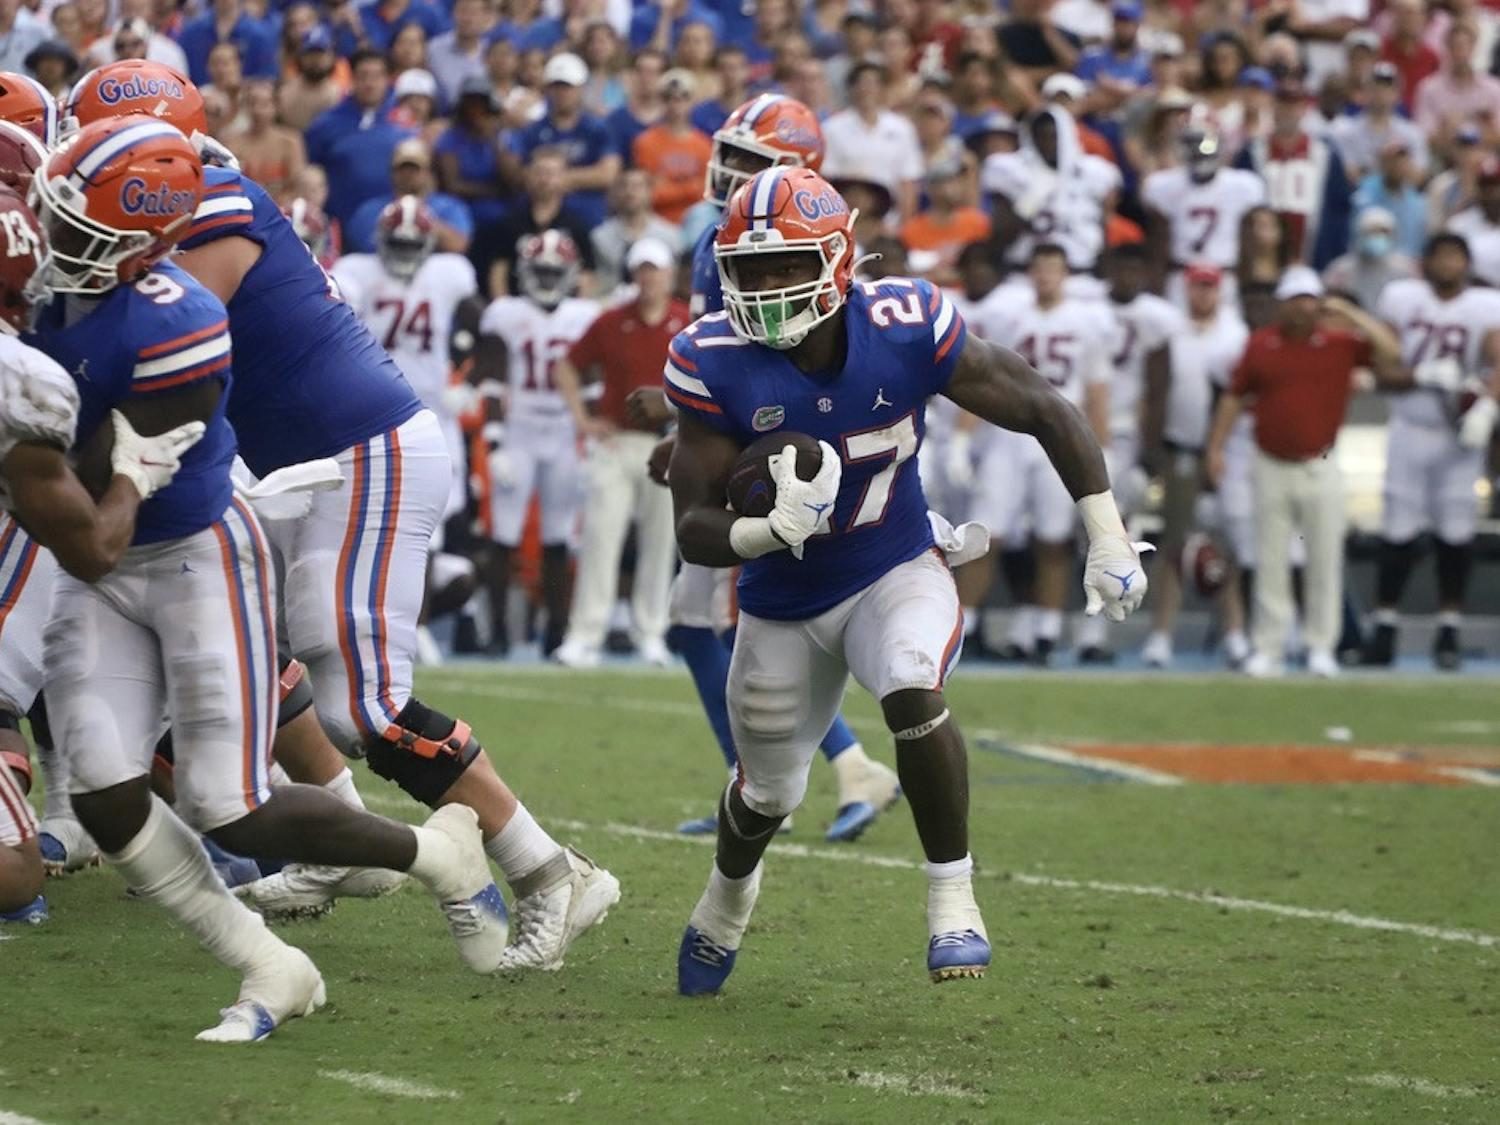 Florida's Dameon Pierce rushes toward the edge of his offensive line against No. 1 Alabama on Sept. 18, 2021.